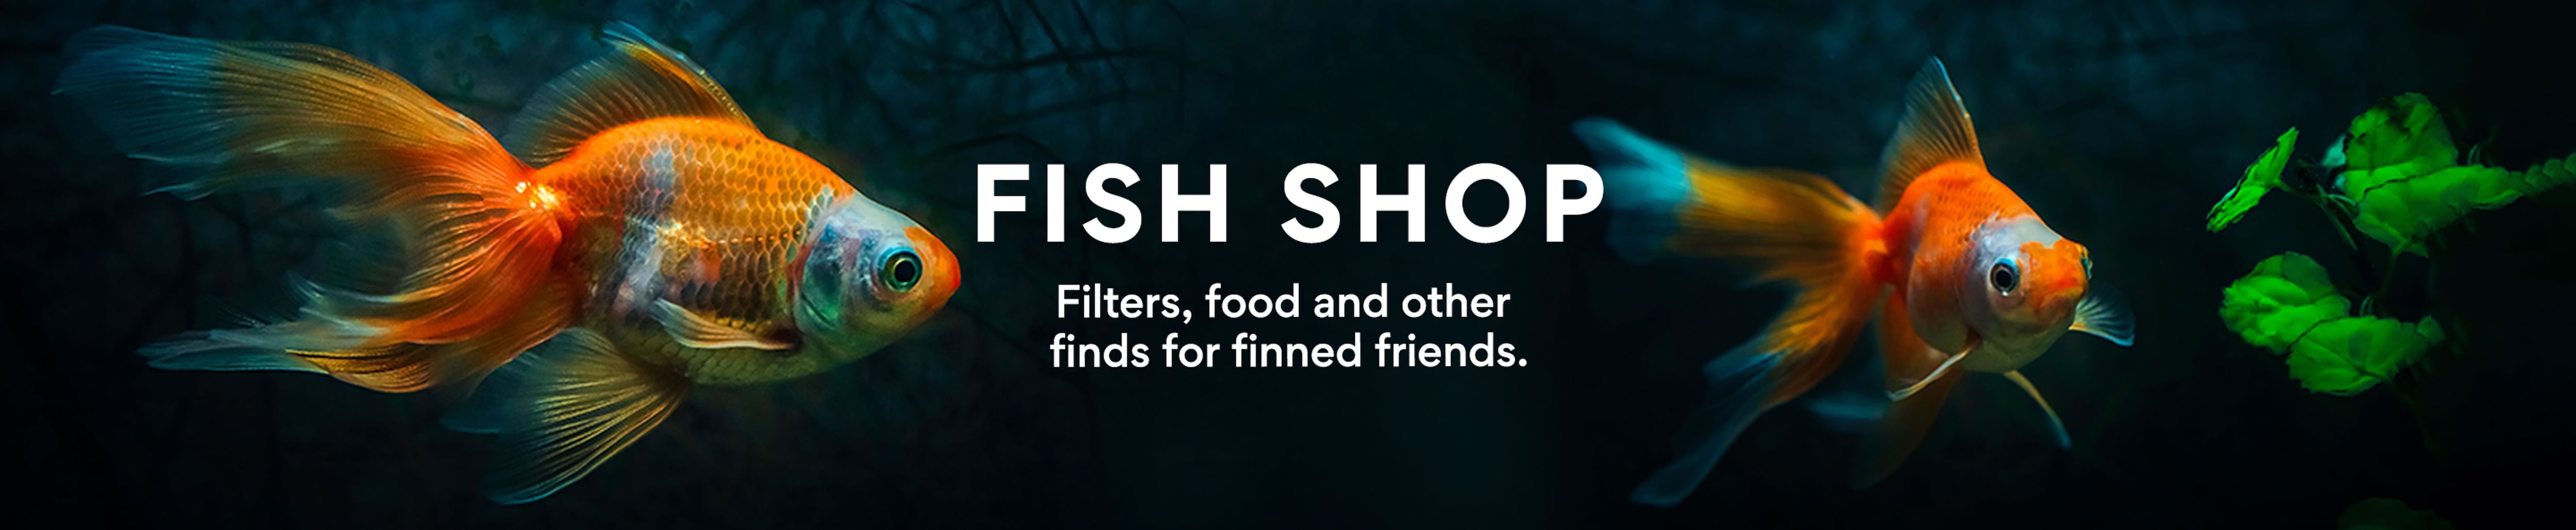 Fish Shop. Filters, food, and other finds for finned friends.